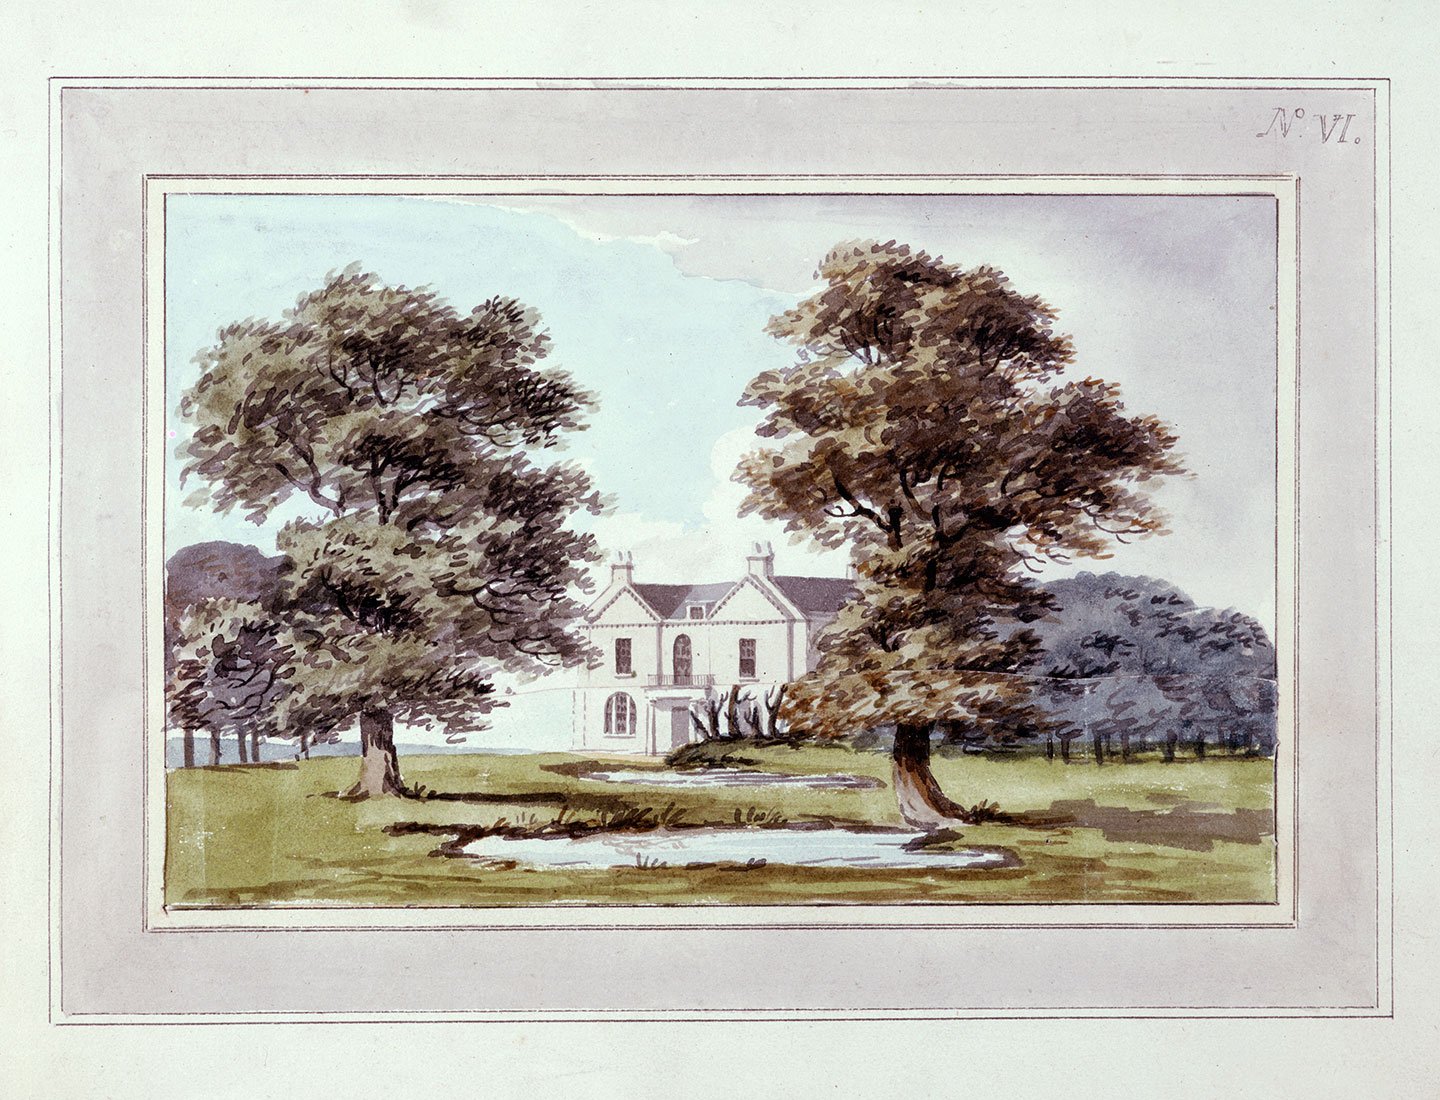 A photographic reproduction of a painting depicting the house and a pond in Moggerhanger Park